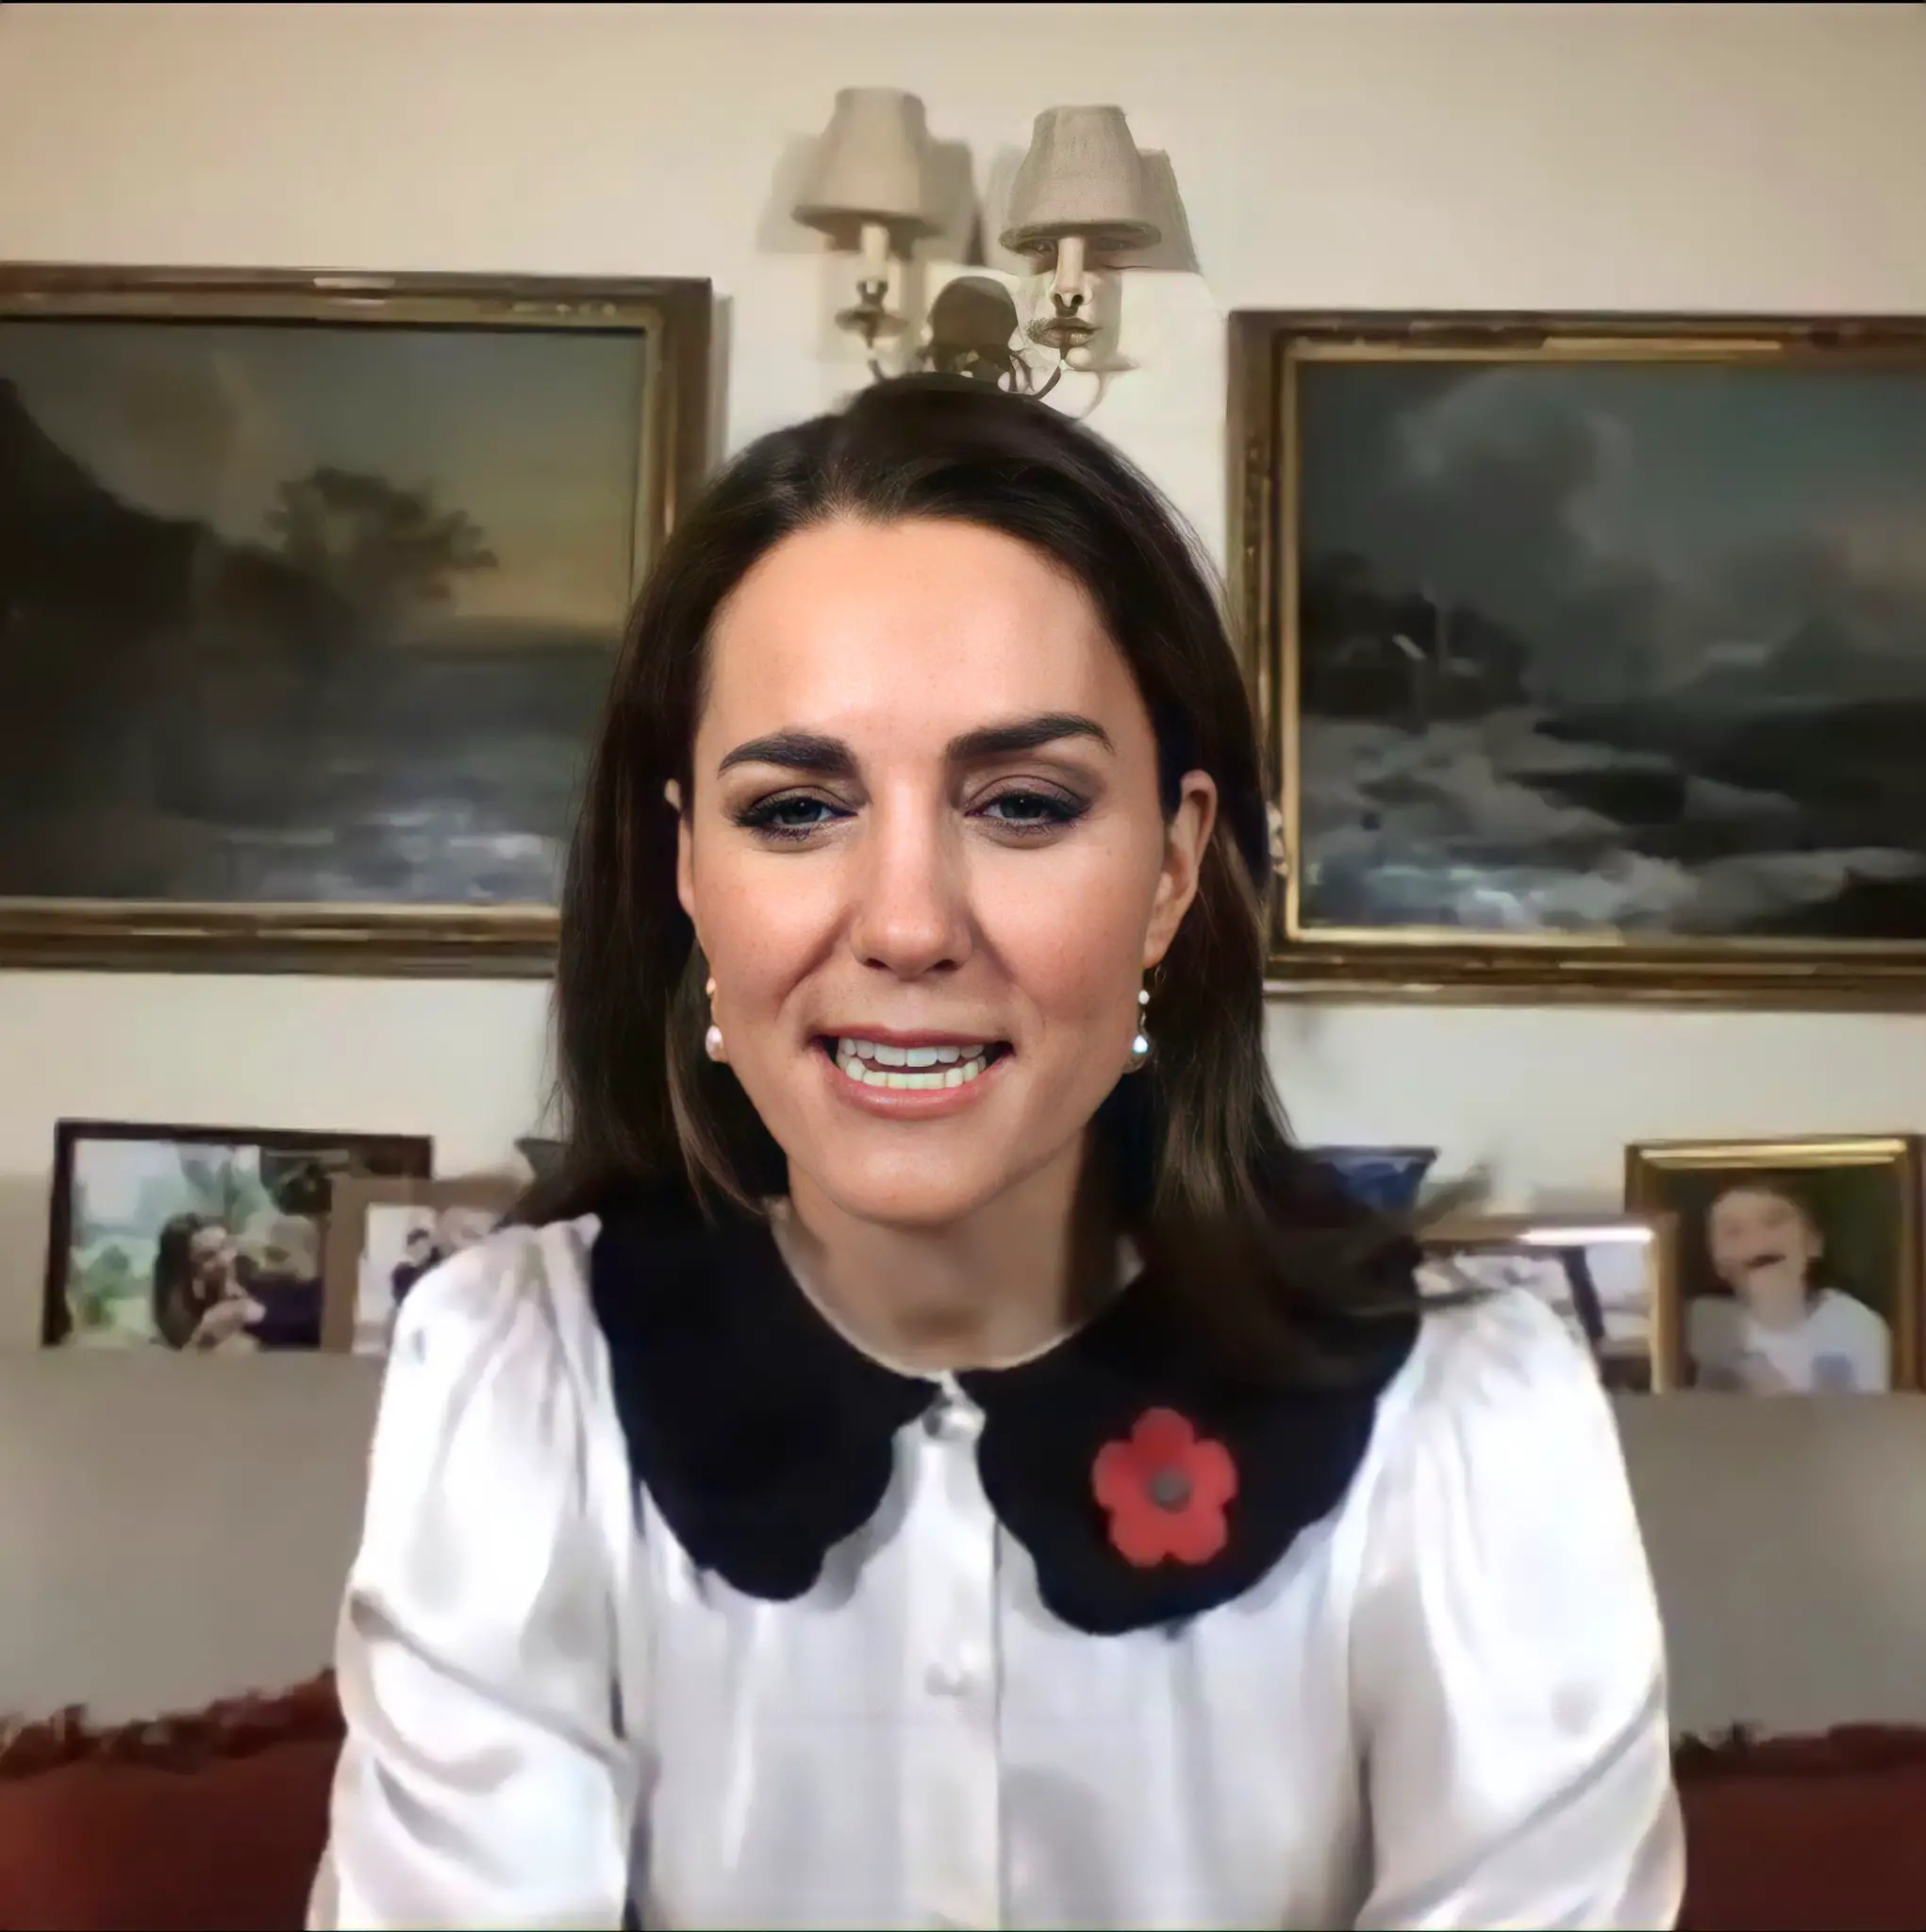 The Duchess of Cambridge wore Ghost Boo Blouse for a video call to mark Remembrance Week